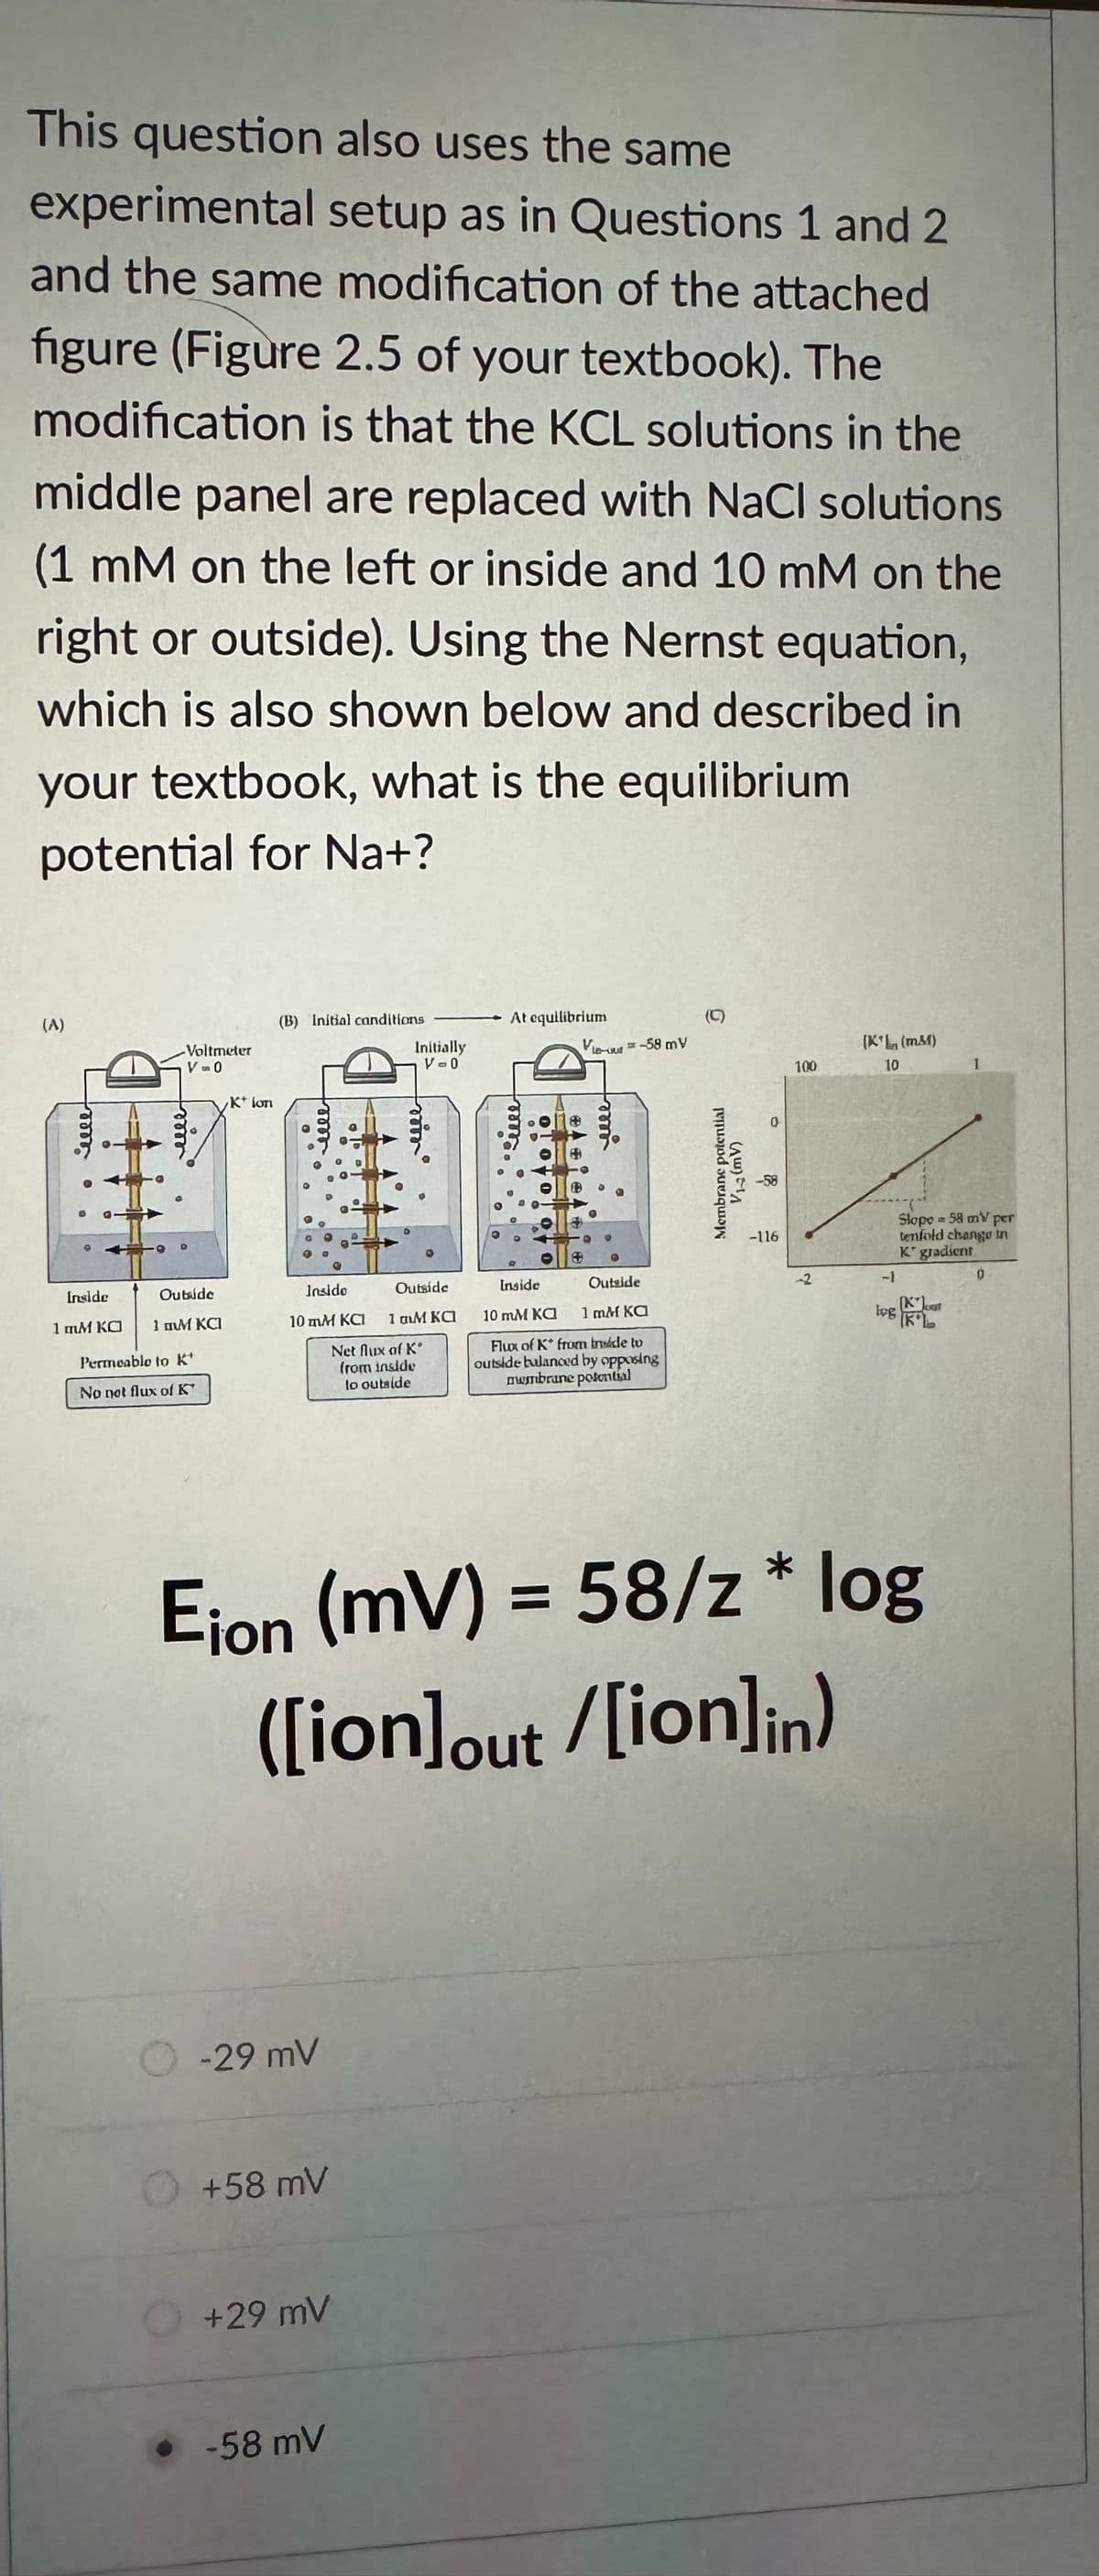 This question also uses the same
experimental setup as in Questions 1 and 2
and the same modification of the attached
figure (Figure 2.5 of your textbook). The
modification is that the KCL solutions in the
middle panel are replaced with NaCl solutions
(1 mM on the left or inside and 10 mM on the
right or outside). Using the Nernst equation,
which is also shown below and described in
your textbook, what is the equilibrium
potential for Na+?
(A)
from
3
Inside
1 mM KO
-Voltmeter
V = 0
Outside
1 πιΜ KC1
Permeable to K'
No not flux of K
K* lon
(B) Initial canditions
Insido
10 mM KCI
-29 mV
+58 mV
Initially
V-0
+29 mV
. -58 mV
mir
Outside
1 αιΜ ΚΟ
Net flux of K*
from inside
to outside
G
At equilibrium
0
Vie-out-58 my
क।
Inside
Outside
10 mM KO
1 mM Ka
Flux of K* from trude to
outside bulanced by opposing
membrane potential
Membrane potential
V₁ (mv)
0
8
-116
100
(K¹ (MM)
10
Eion (mv) = 58/z* log
([ion]out /[ion]in)
Slope 58 my per
tenfold change in
K gradient
KLOST
Log K
I
0